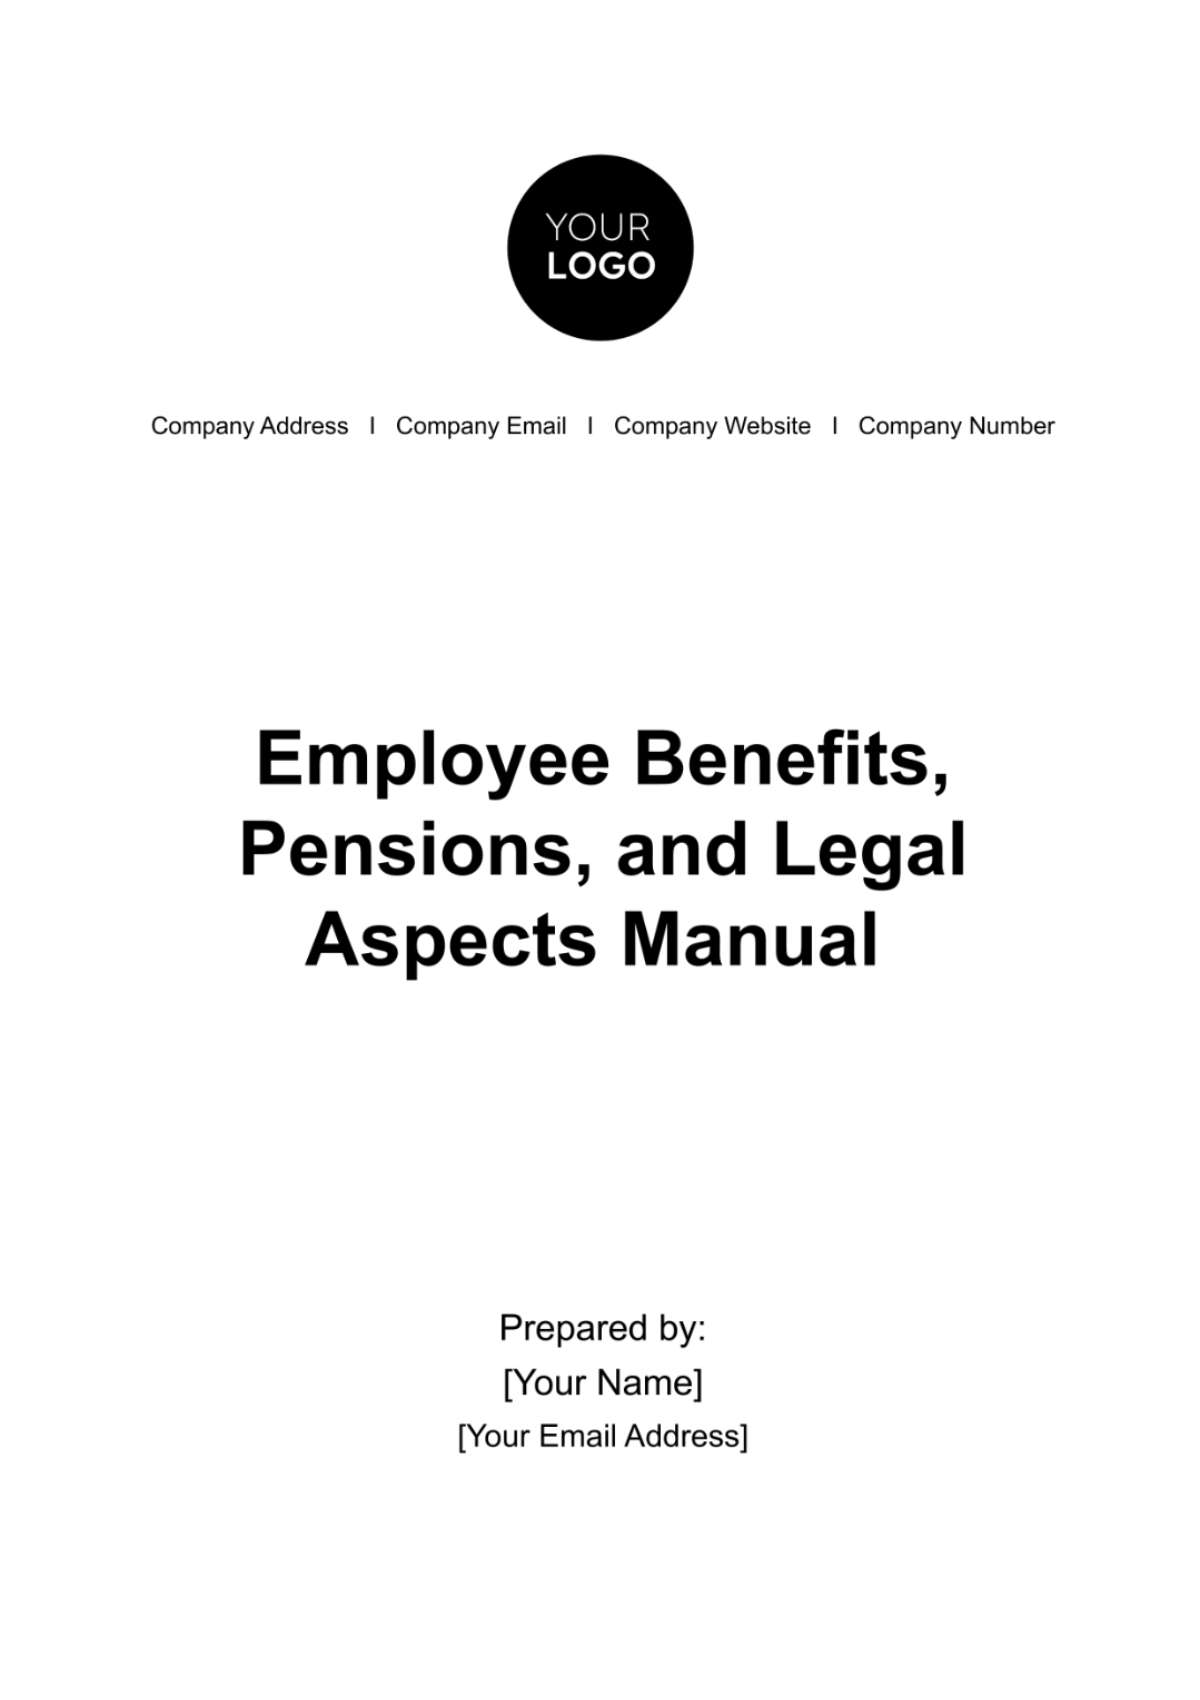 Free Employee Benefits, Pensions, and Legal Aspects Manual HR Template